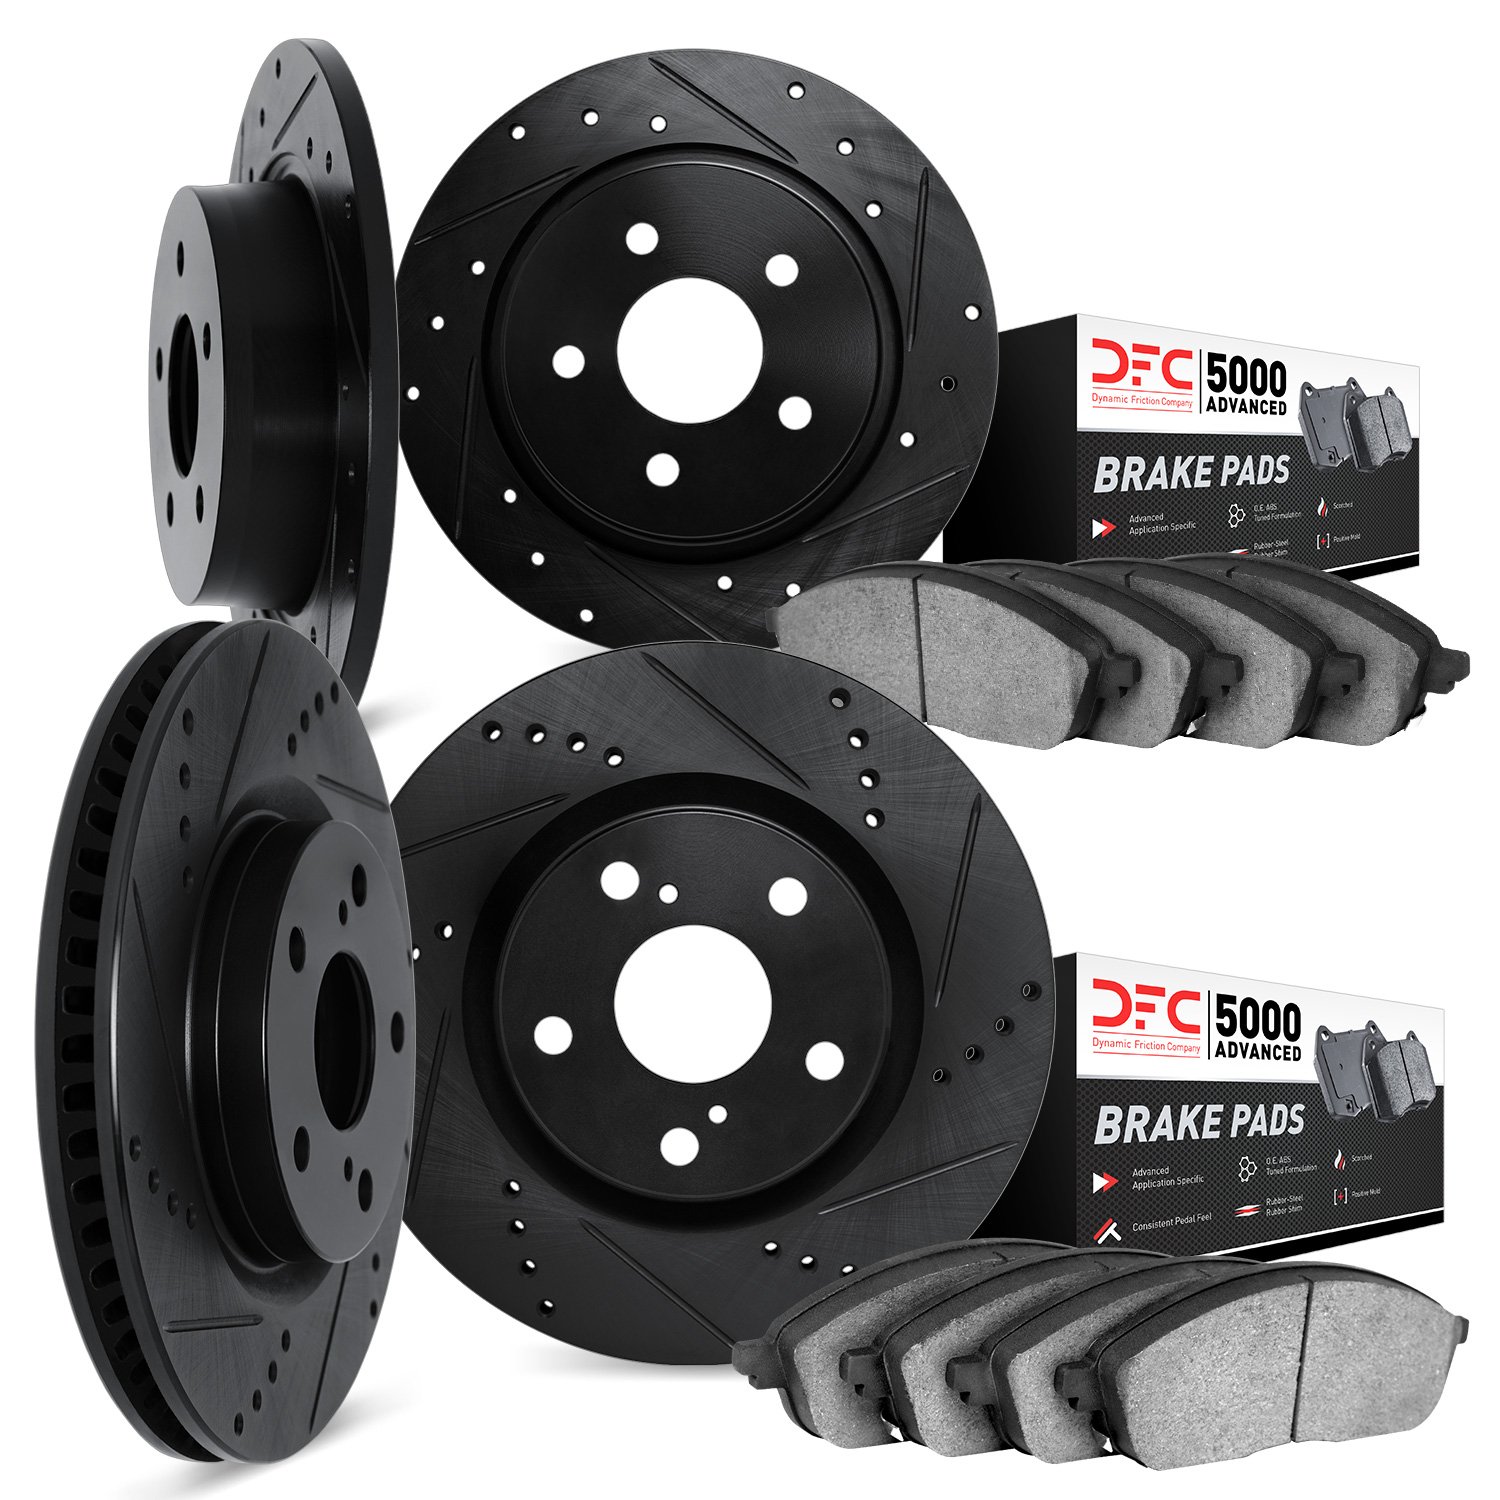 8504-59048 Drilled/Slotted Brake Rotors w/5000 Advanced Brake Pads Kit [Black], 2001-2002 Acura/Honda, Position: Front and Rear